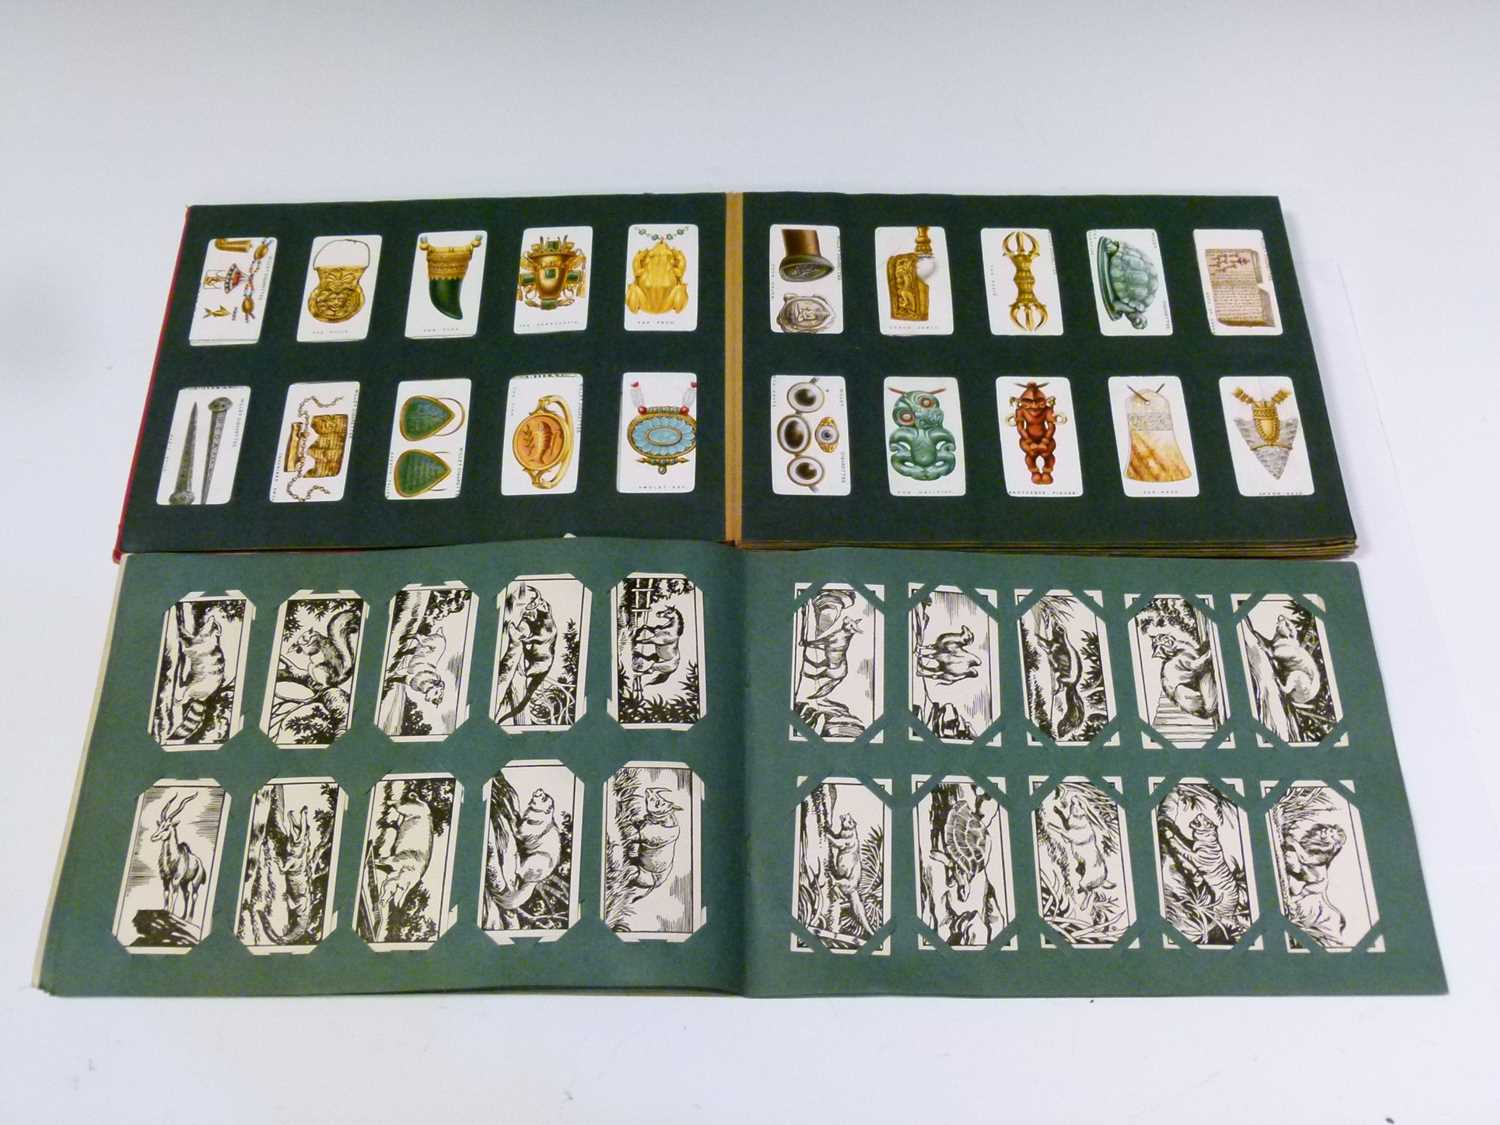 Two albums of cigarette cards